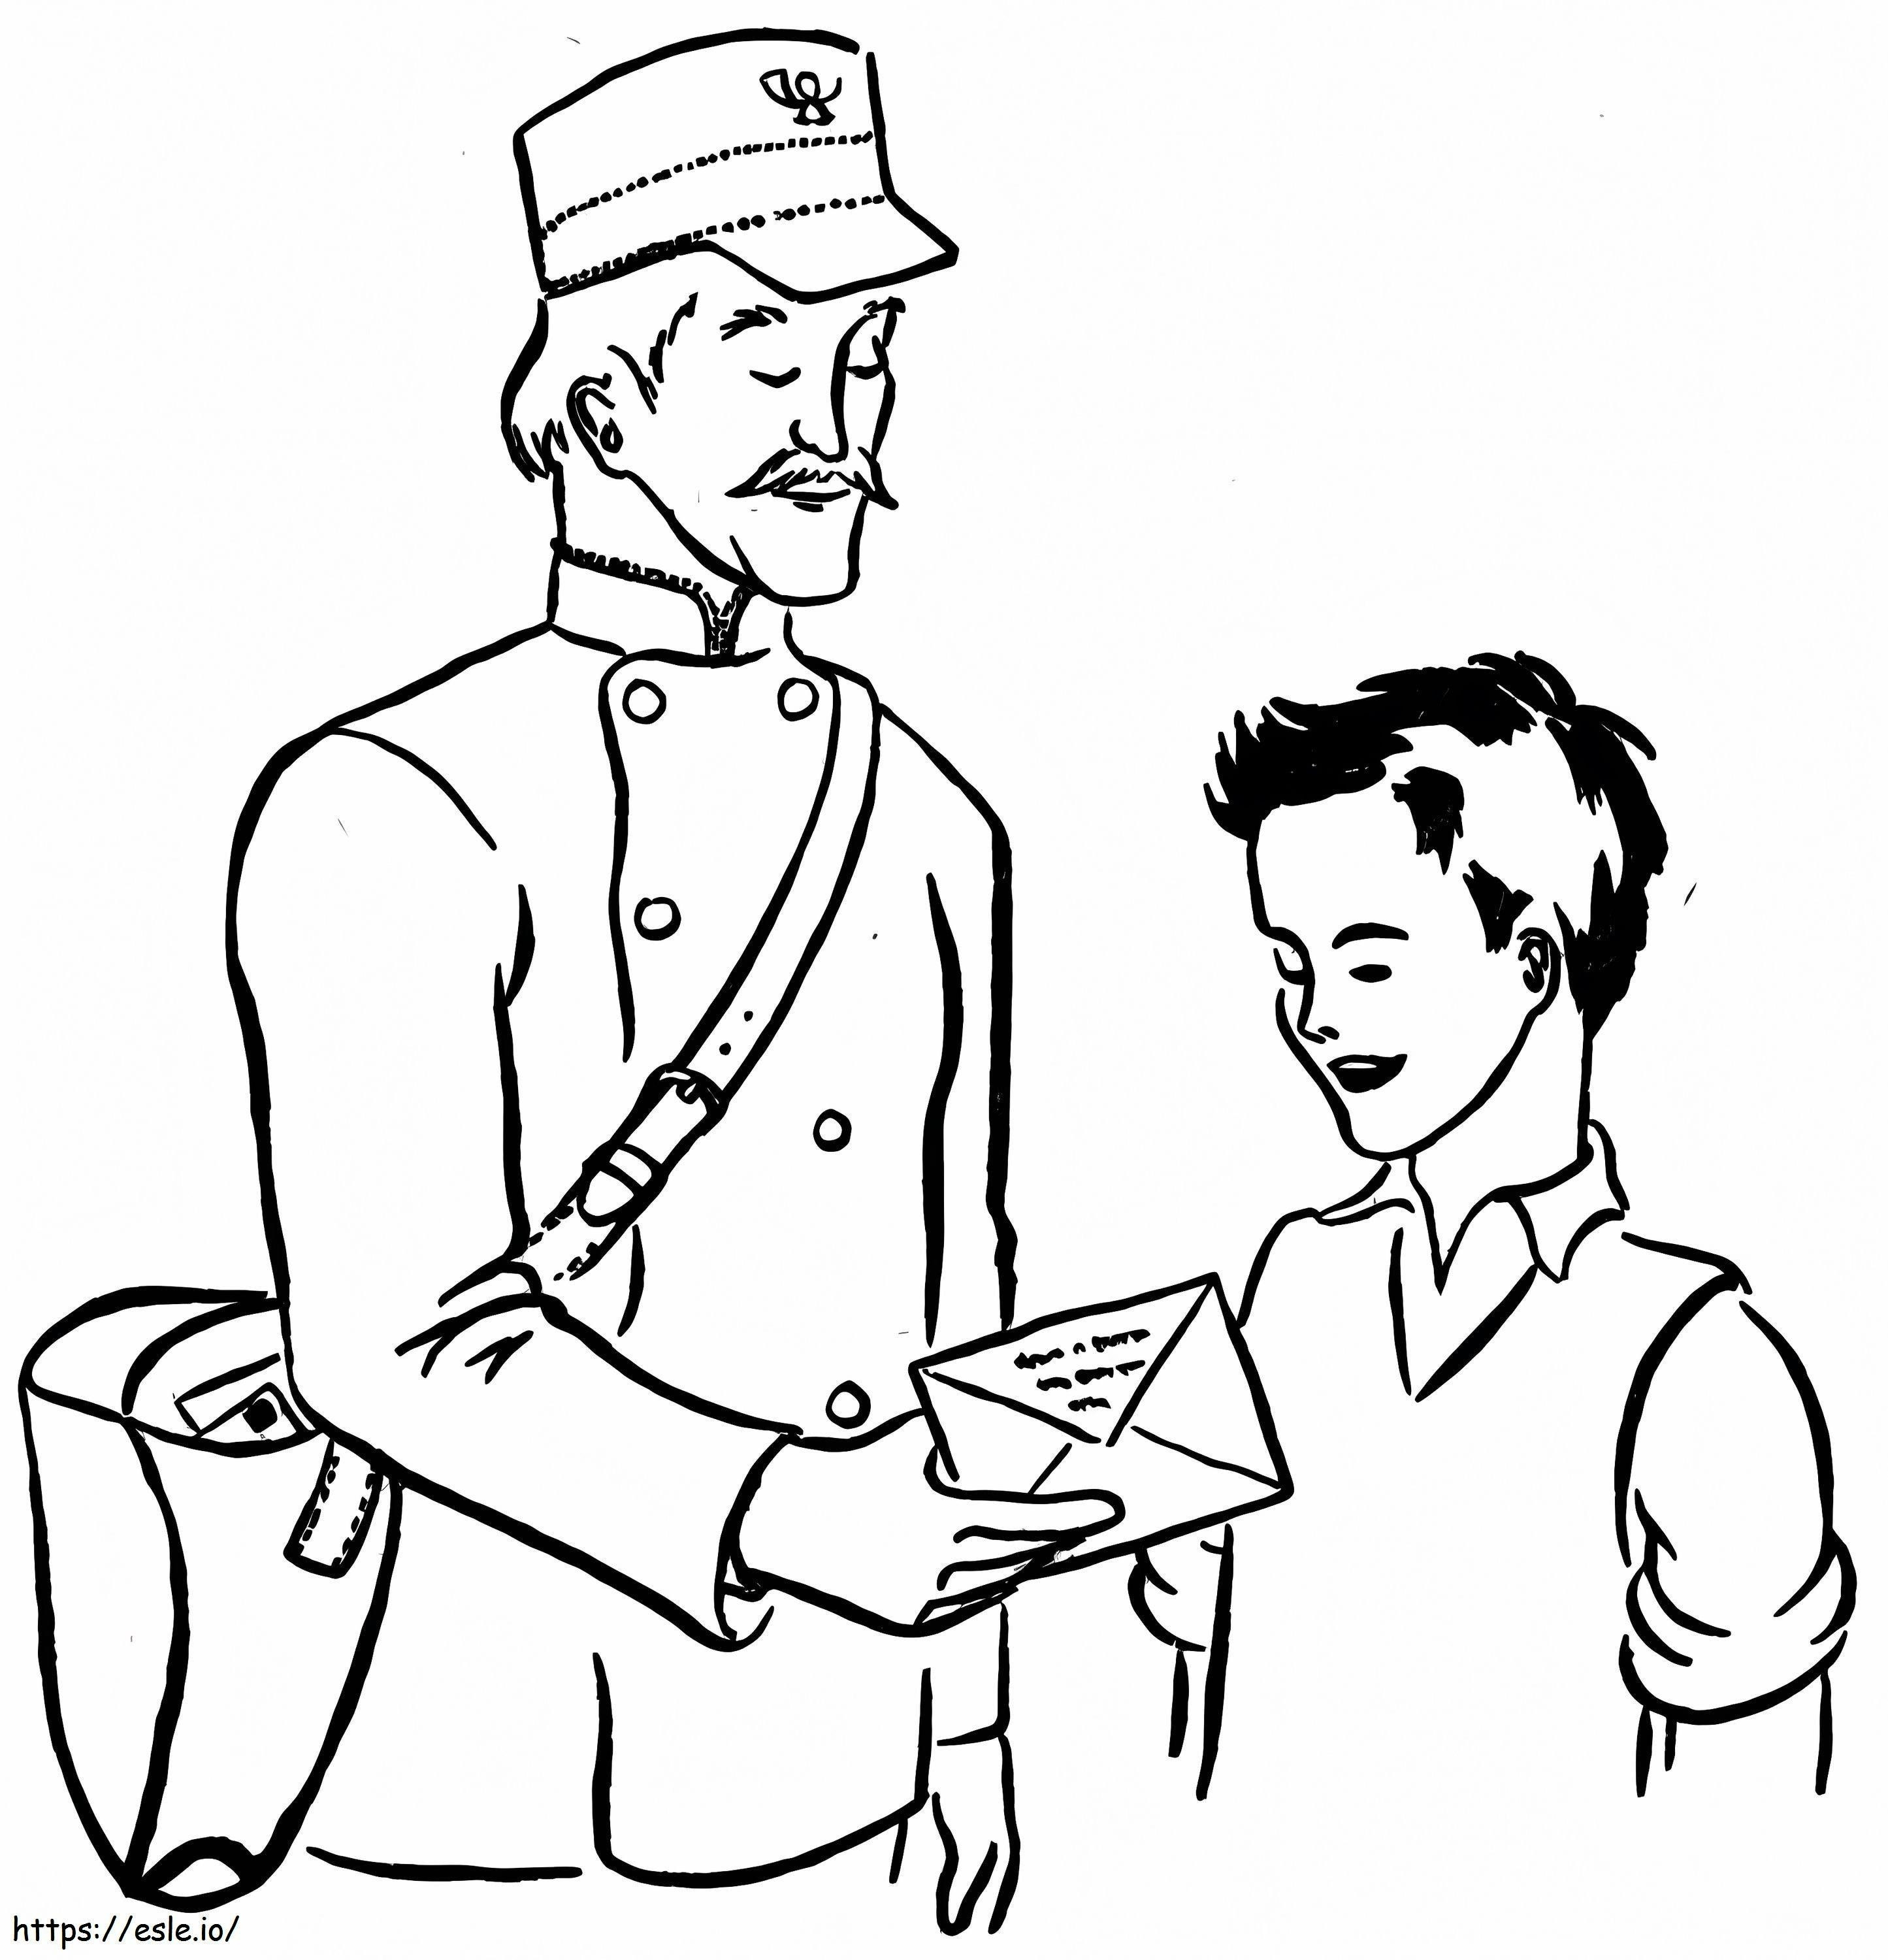 Postman And A Kid coloring page